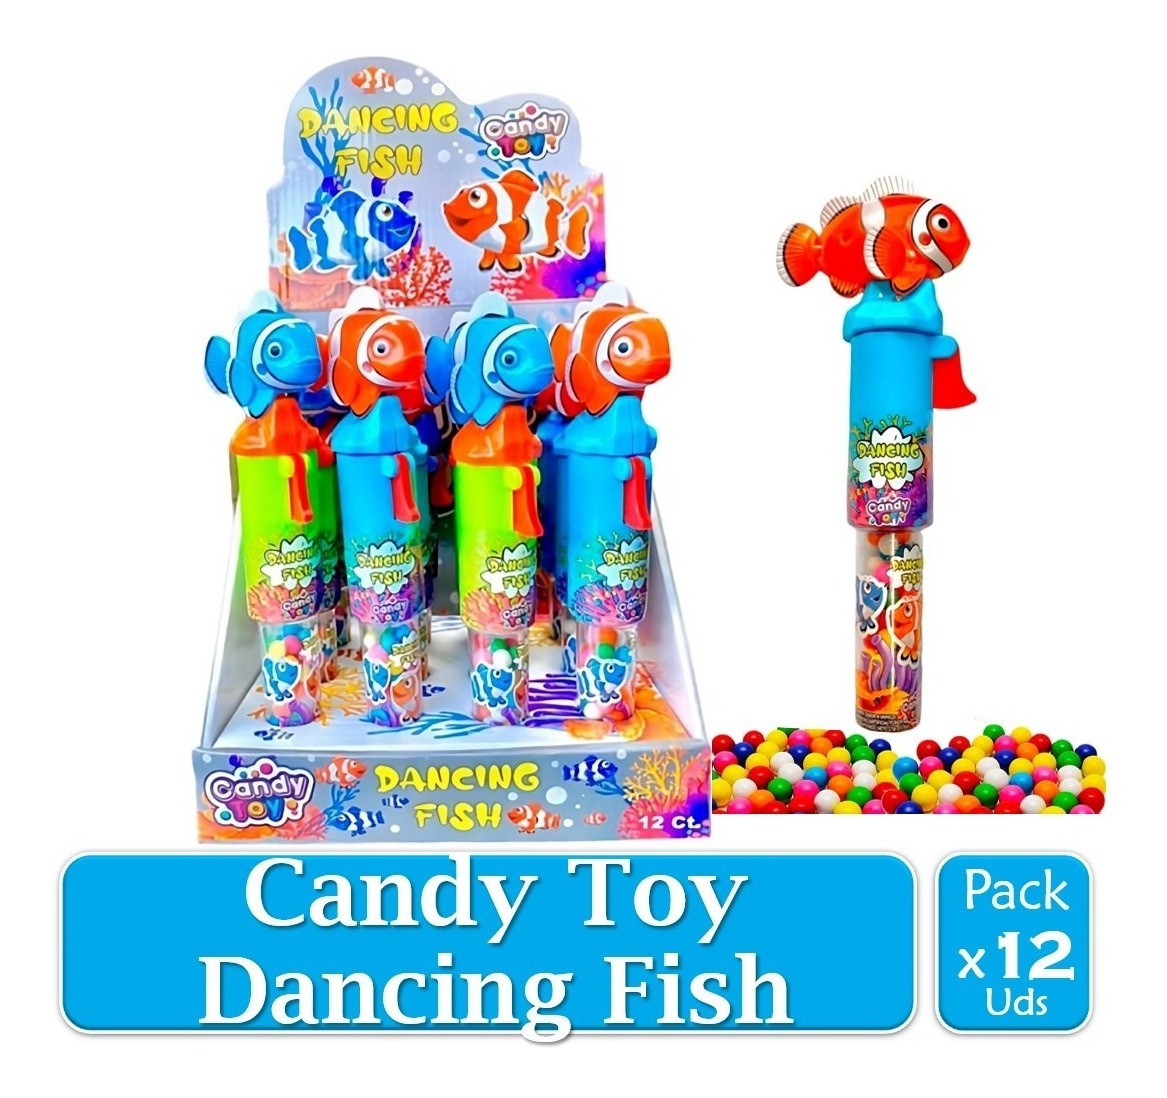 Candy Toy Dancing Fish X 12 Uds